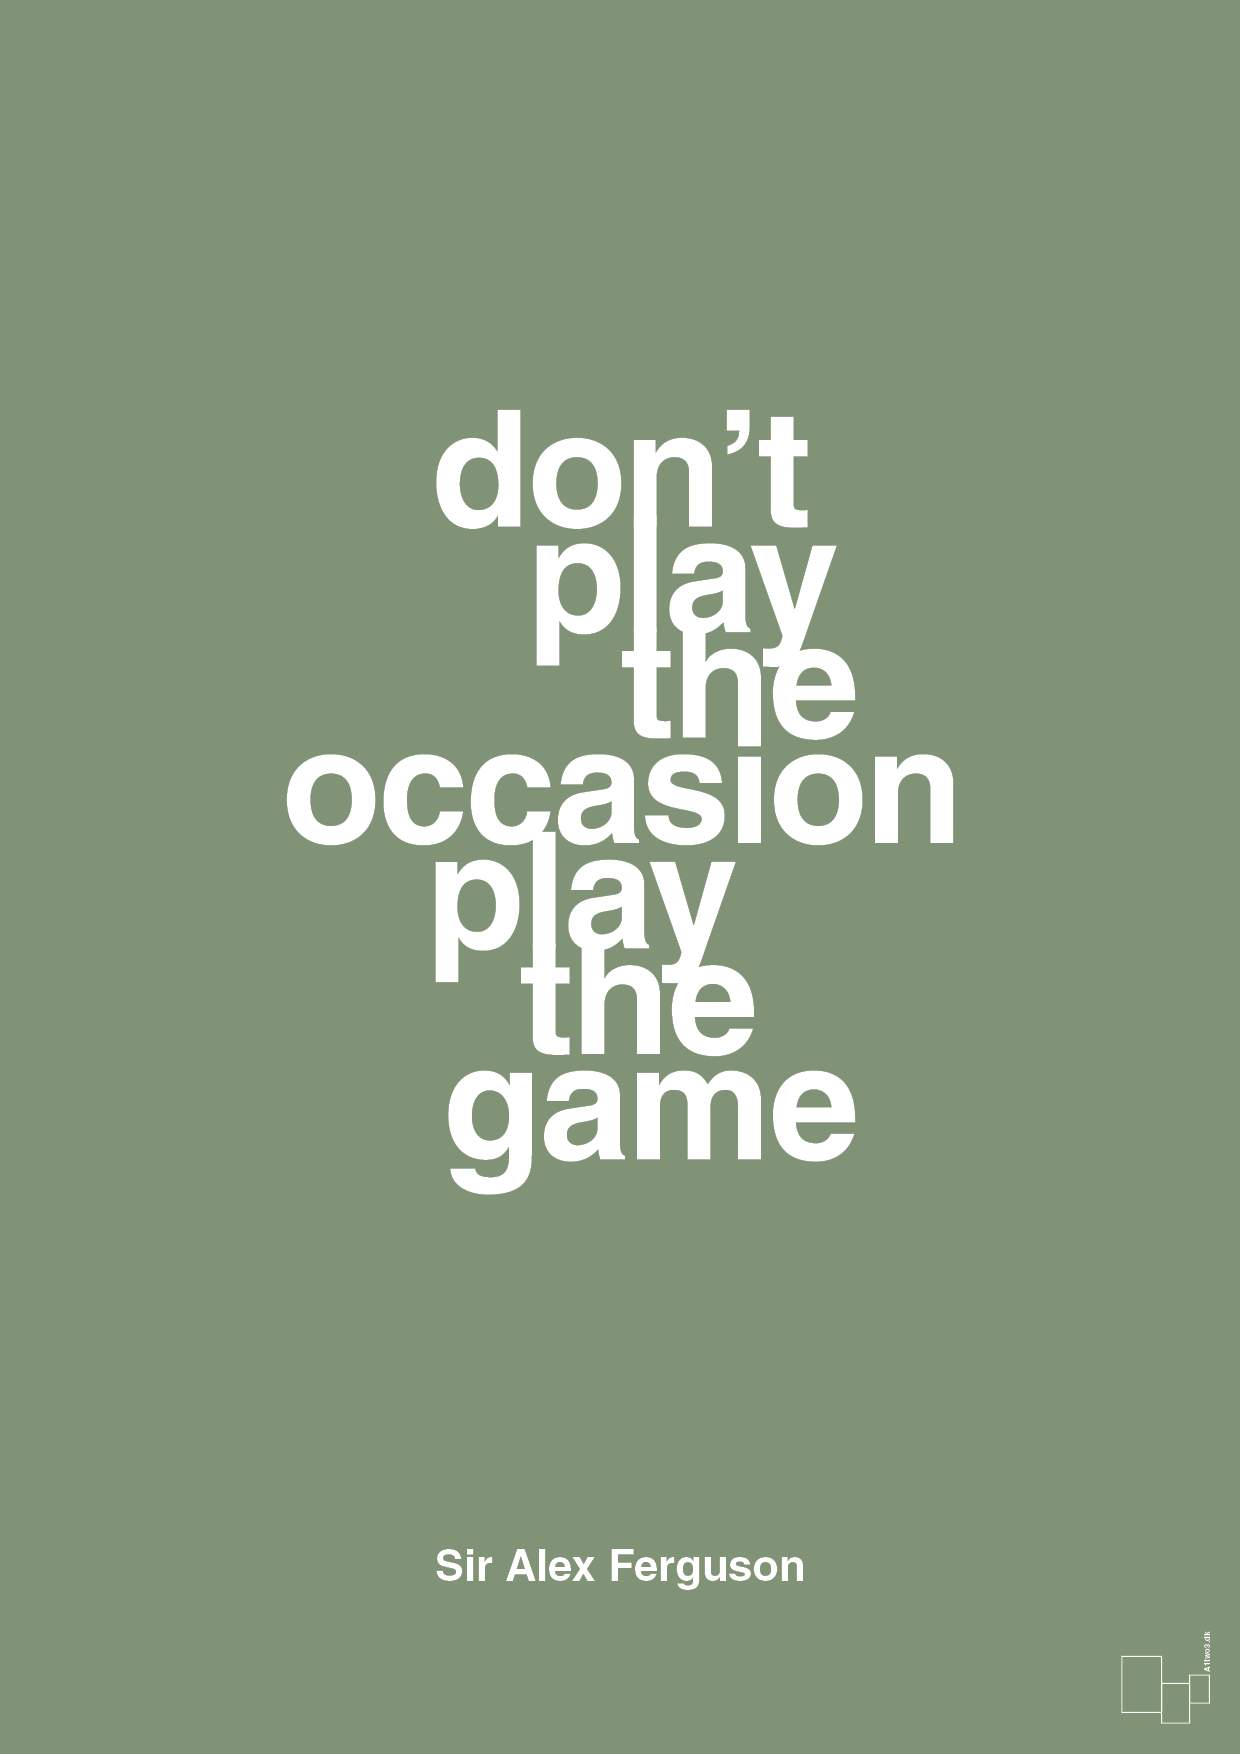 don’t play the occasion play the game - Plakat med Citater i Jade